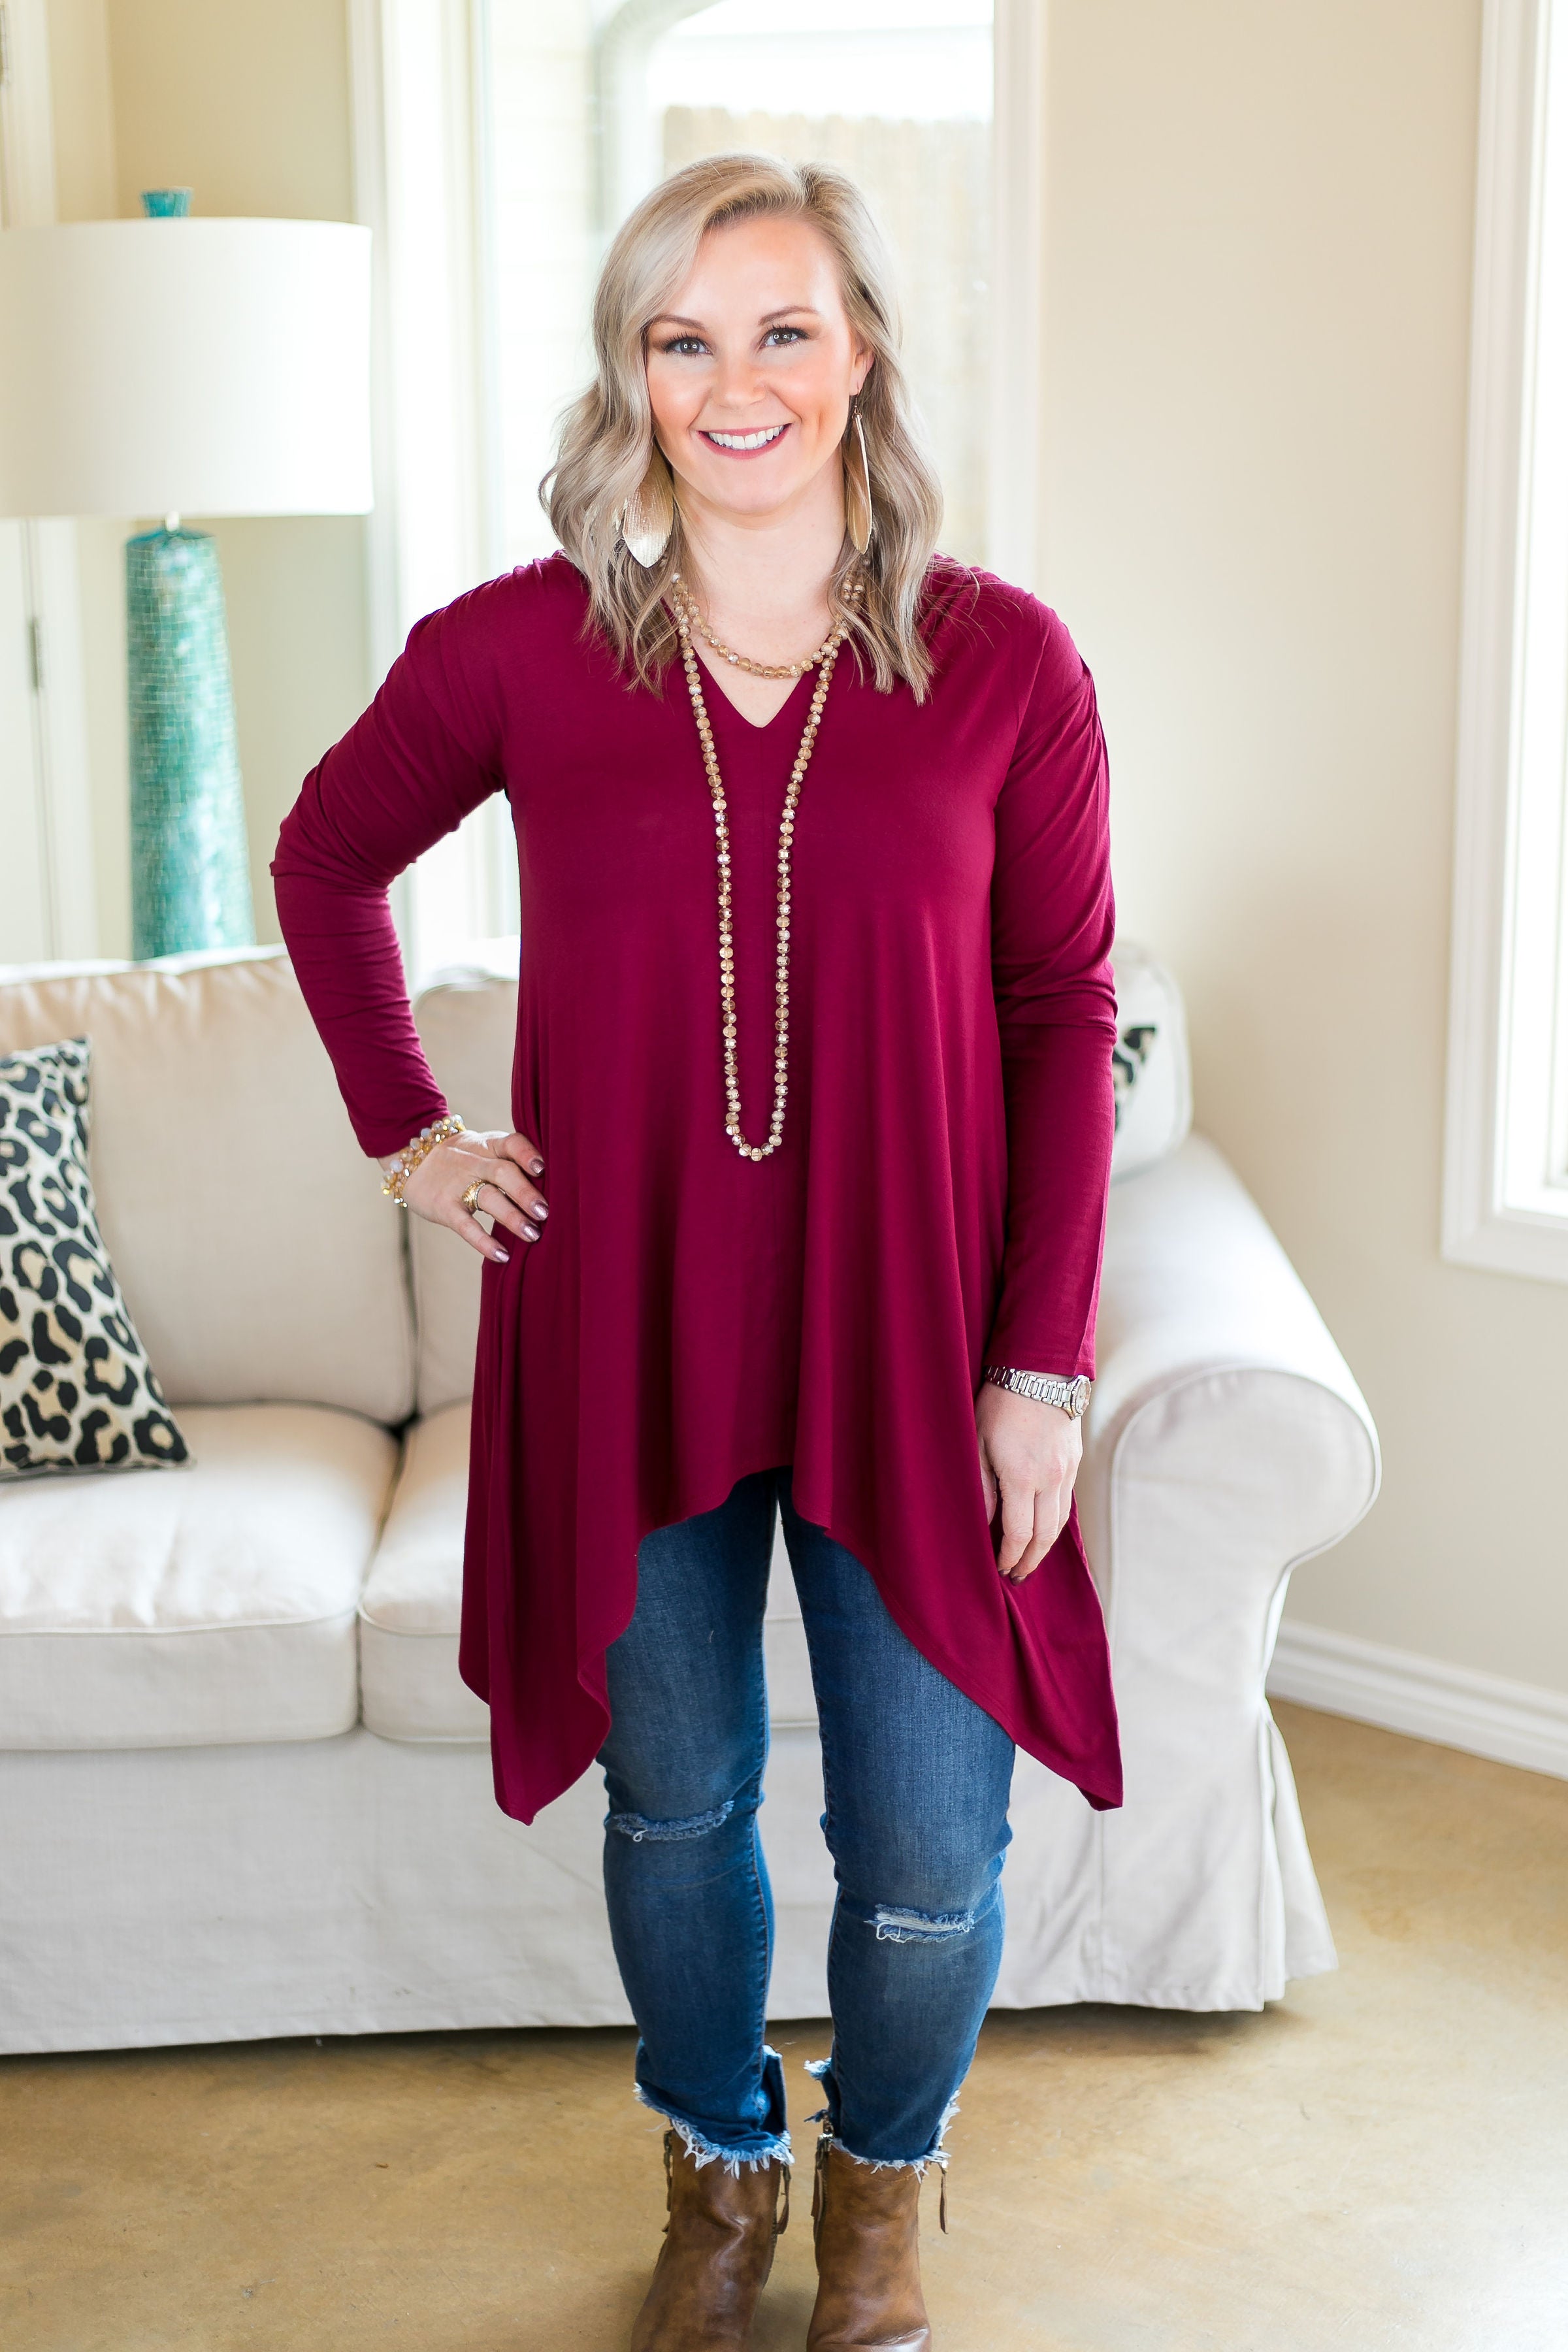 These Days Handkerchief Tunic in Maroon - Giddy Up Glamour Boutique